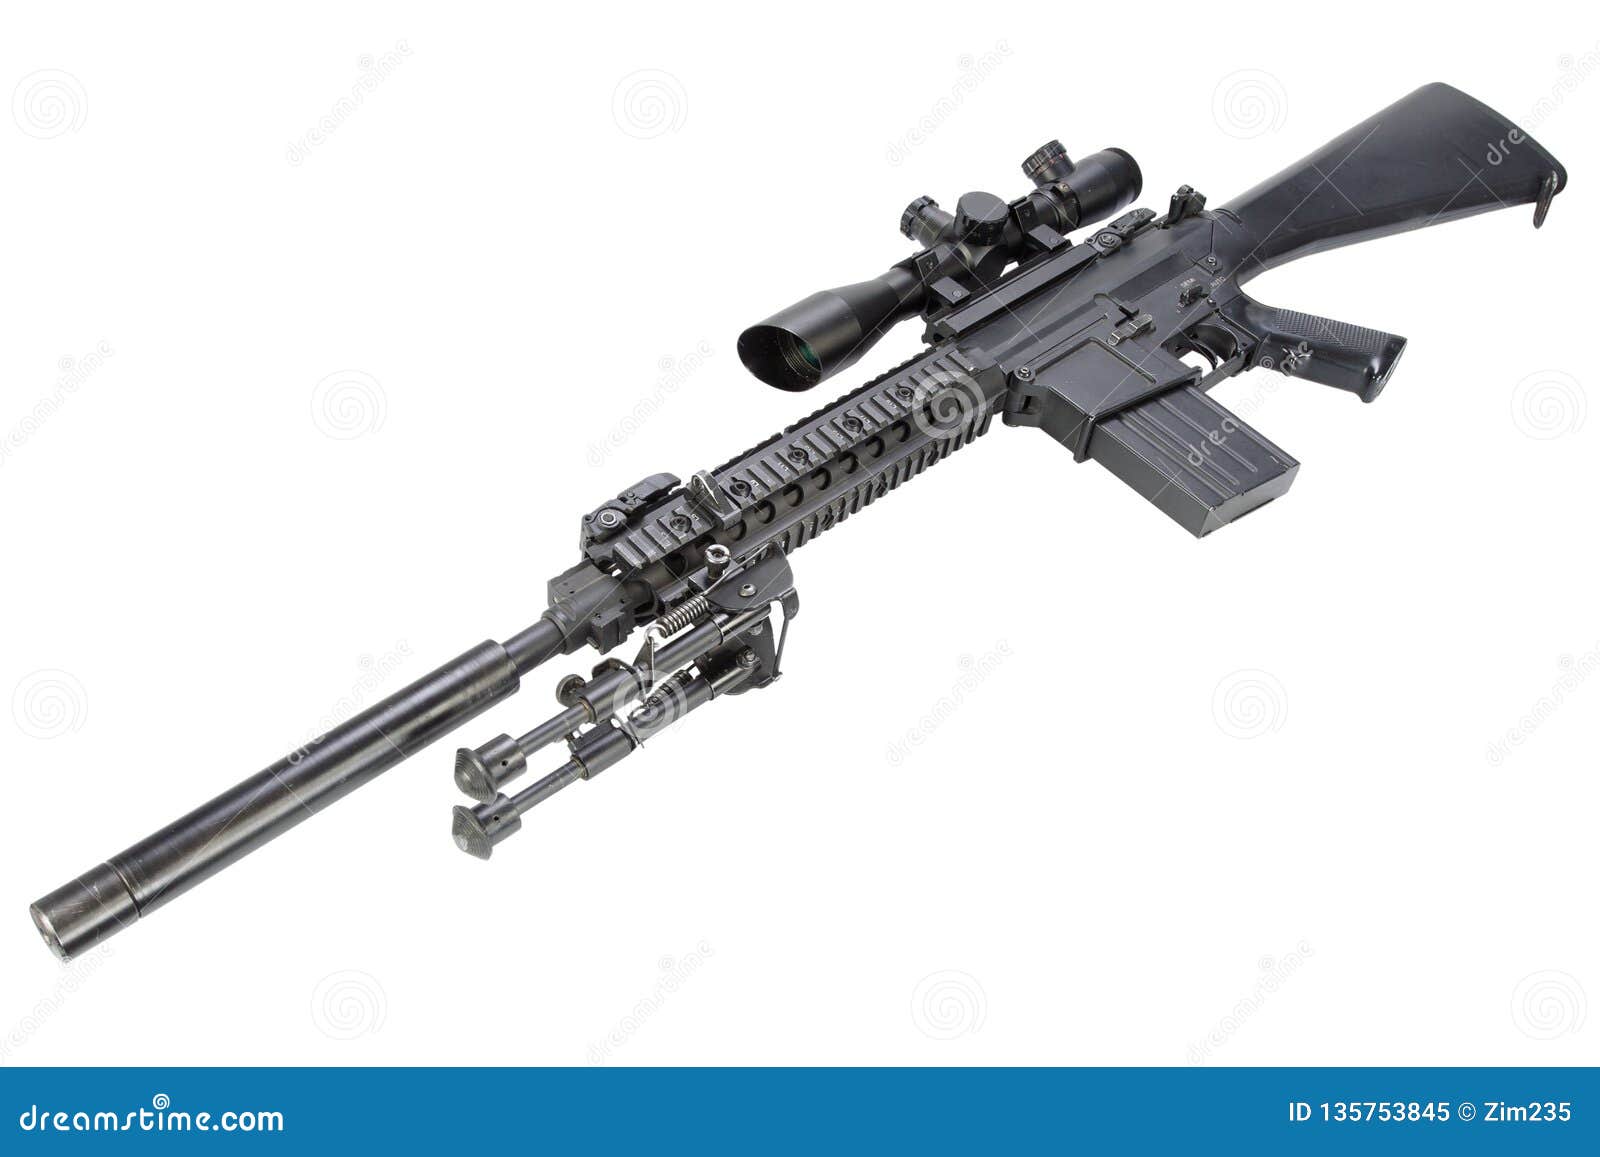 semi automatic sniper rifle with bipod and silencer